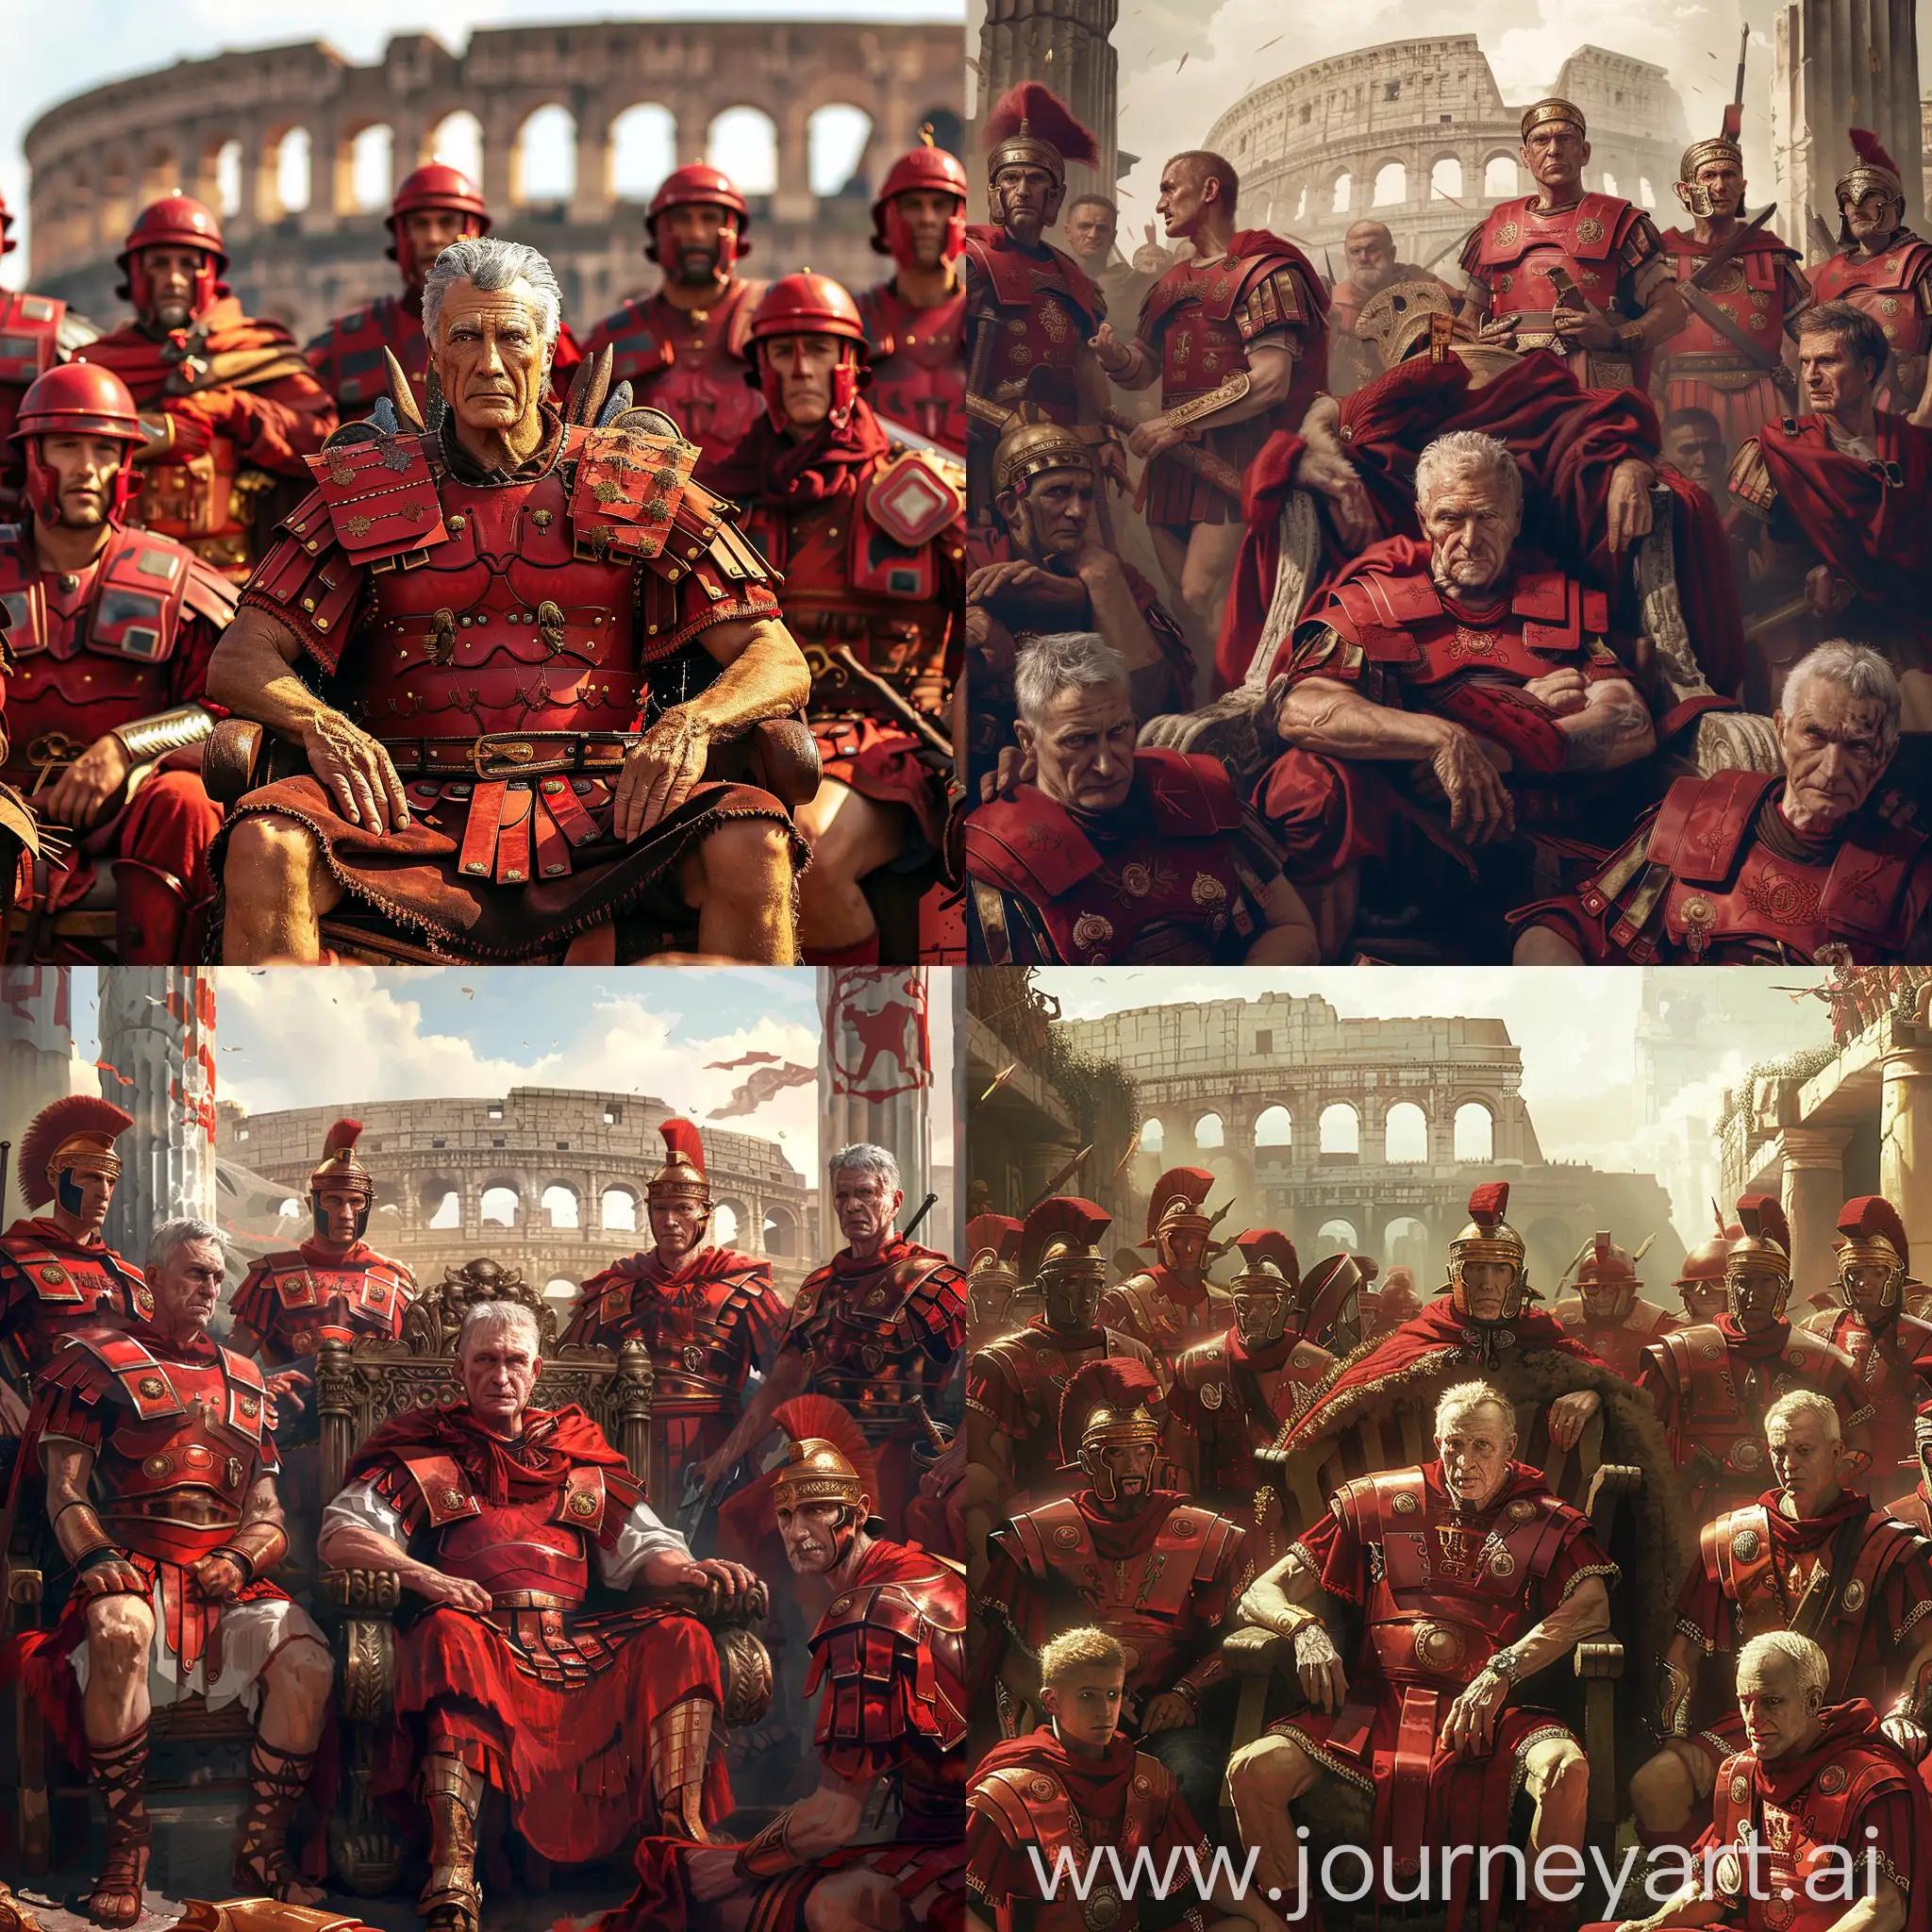 gray short hair old Cesar is in red Roman armor, he is sitting on his throne in the middle, other Roman legionaries and warriors in red amor are around him, they are all in a Roman military base, Rome colosseum behind them, 